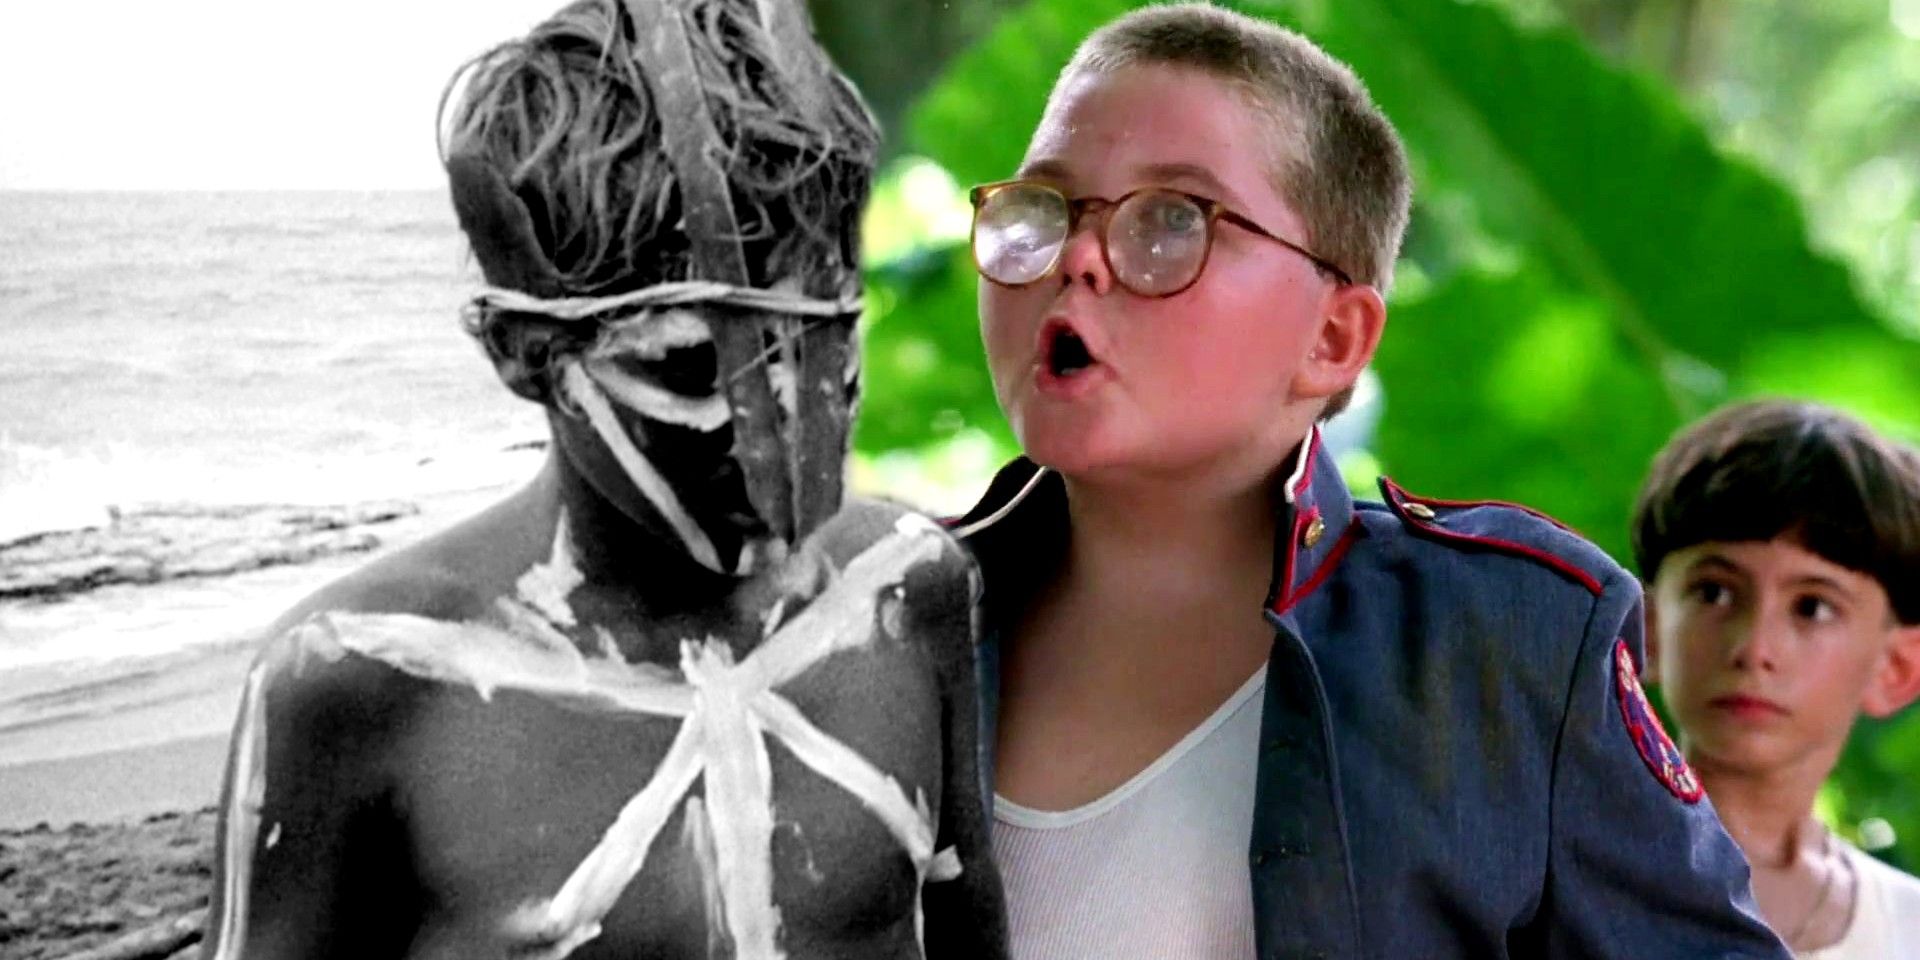 Custom image of a young boy and a kid with glasses in different versions of Lord of the Flies